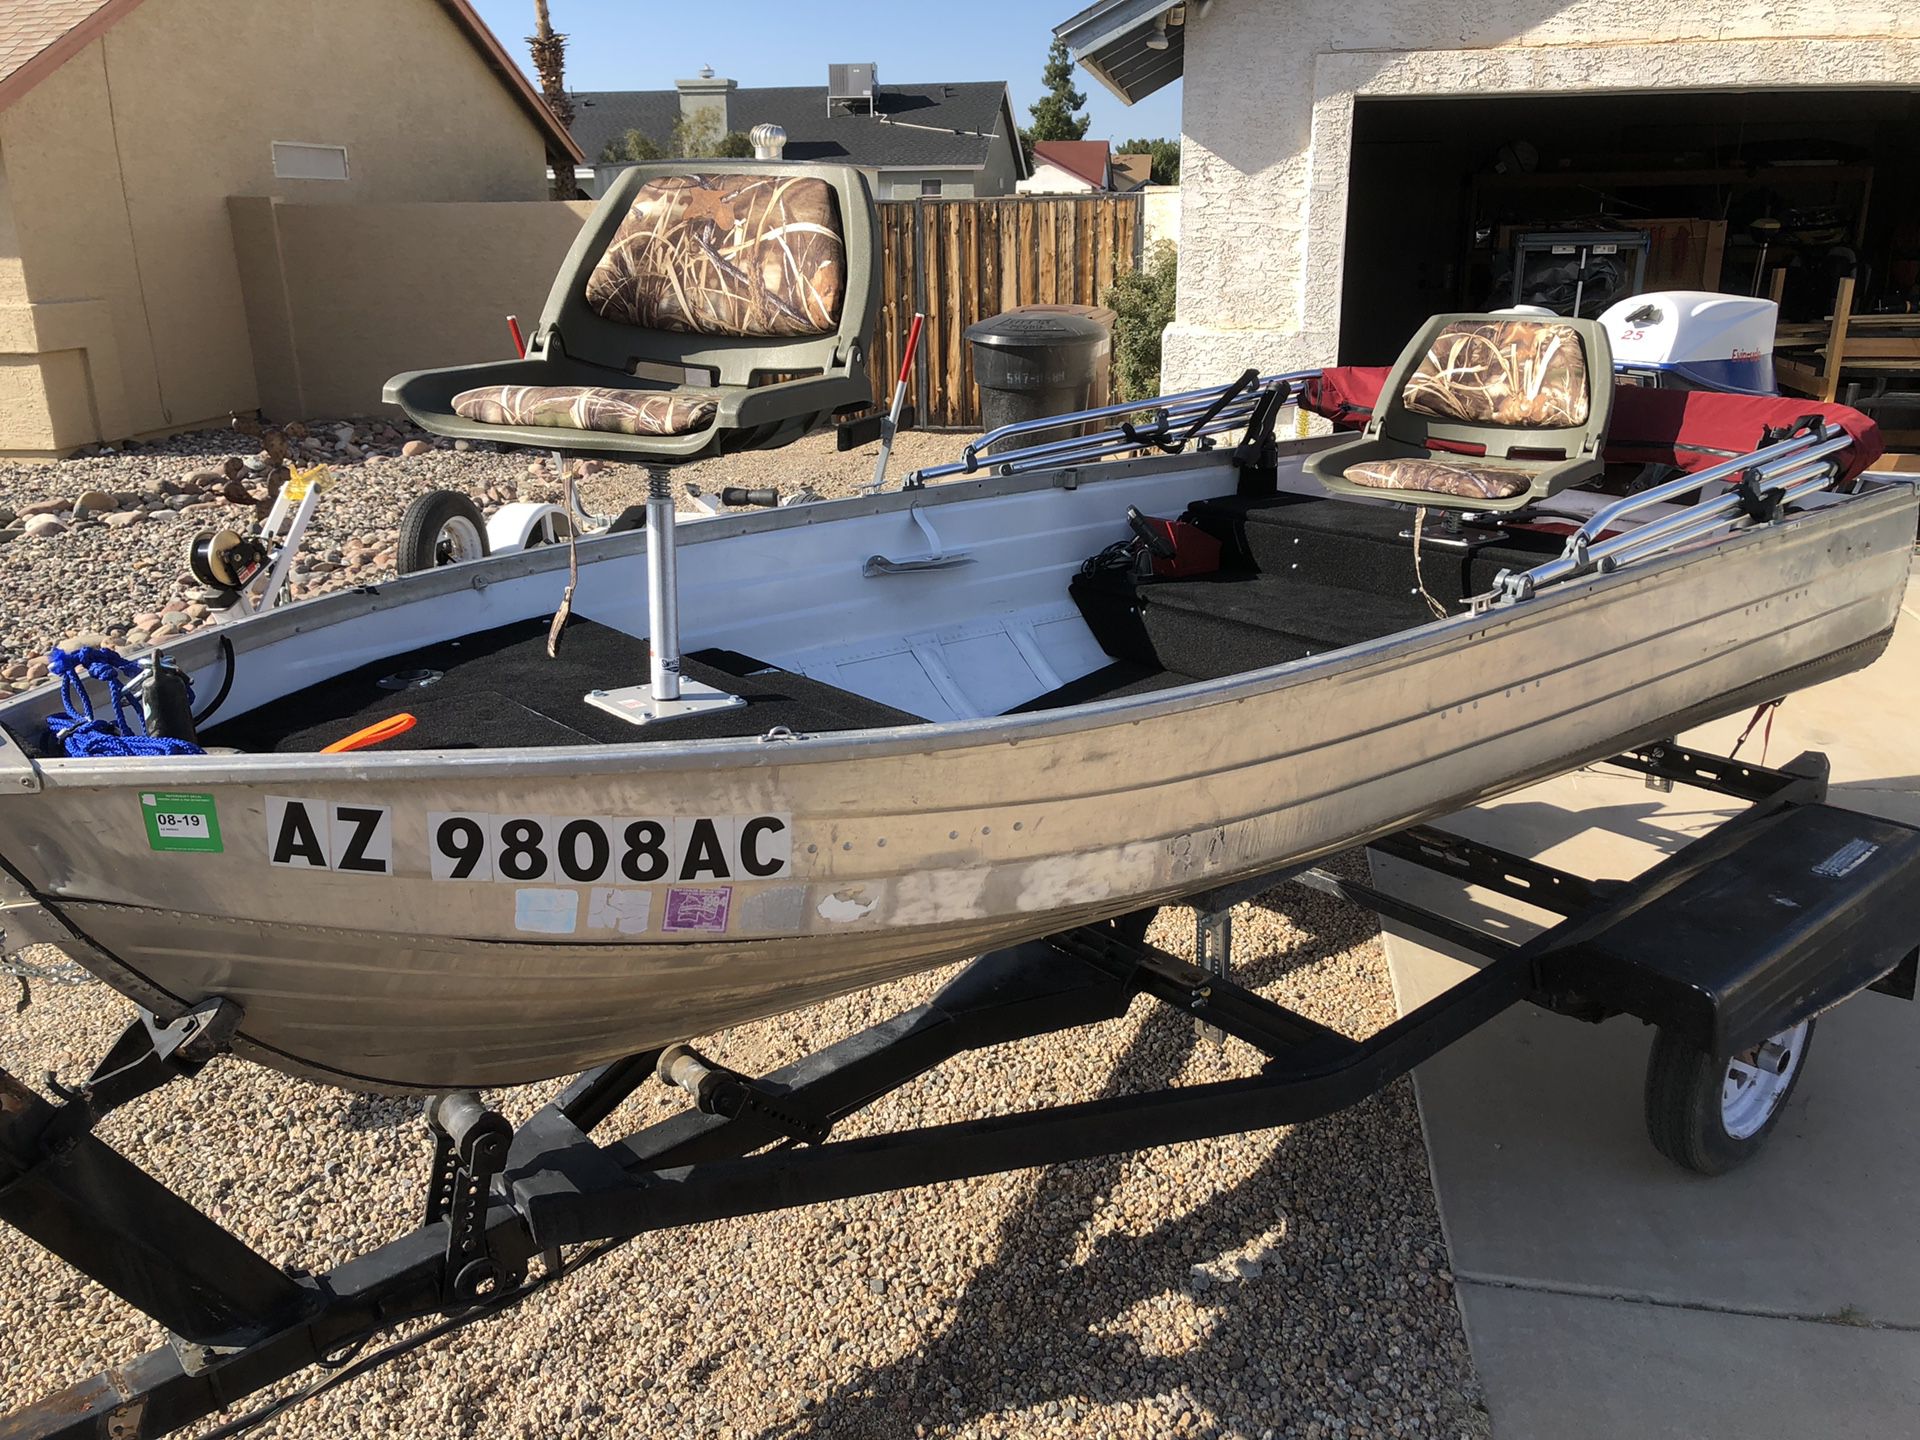 12 Mirrocraft Aluminum Fishing Boat For Sale In Peoria Az Offerup